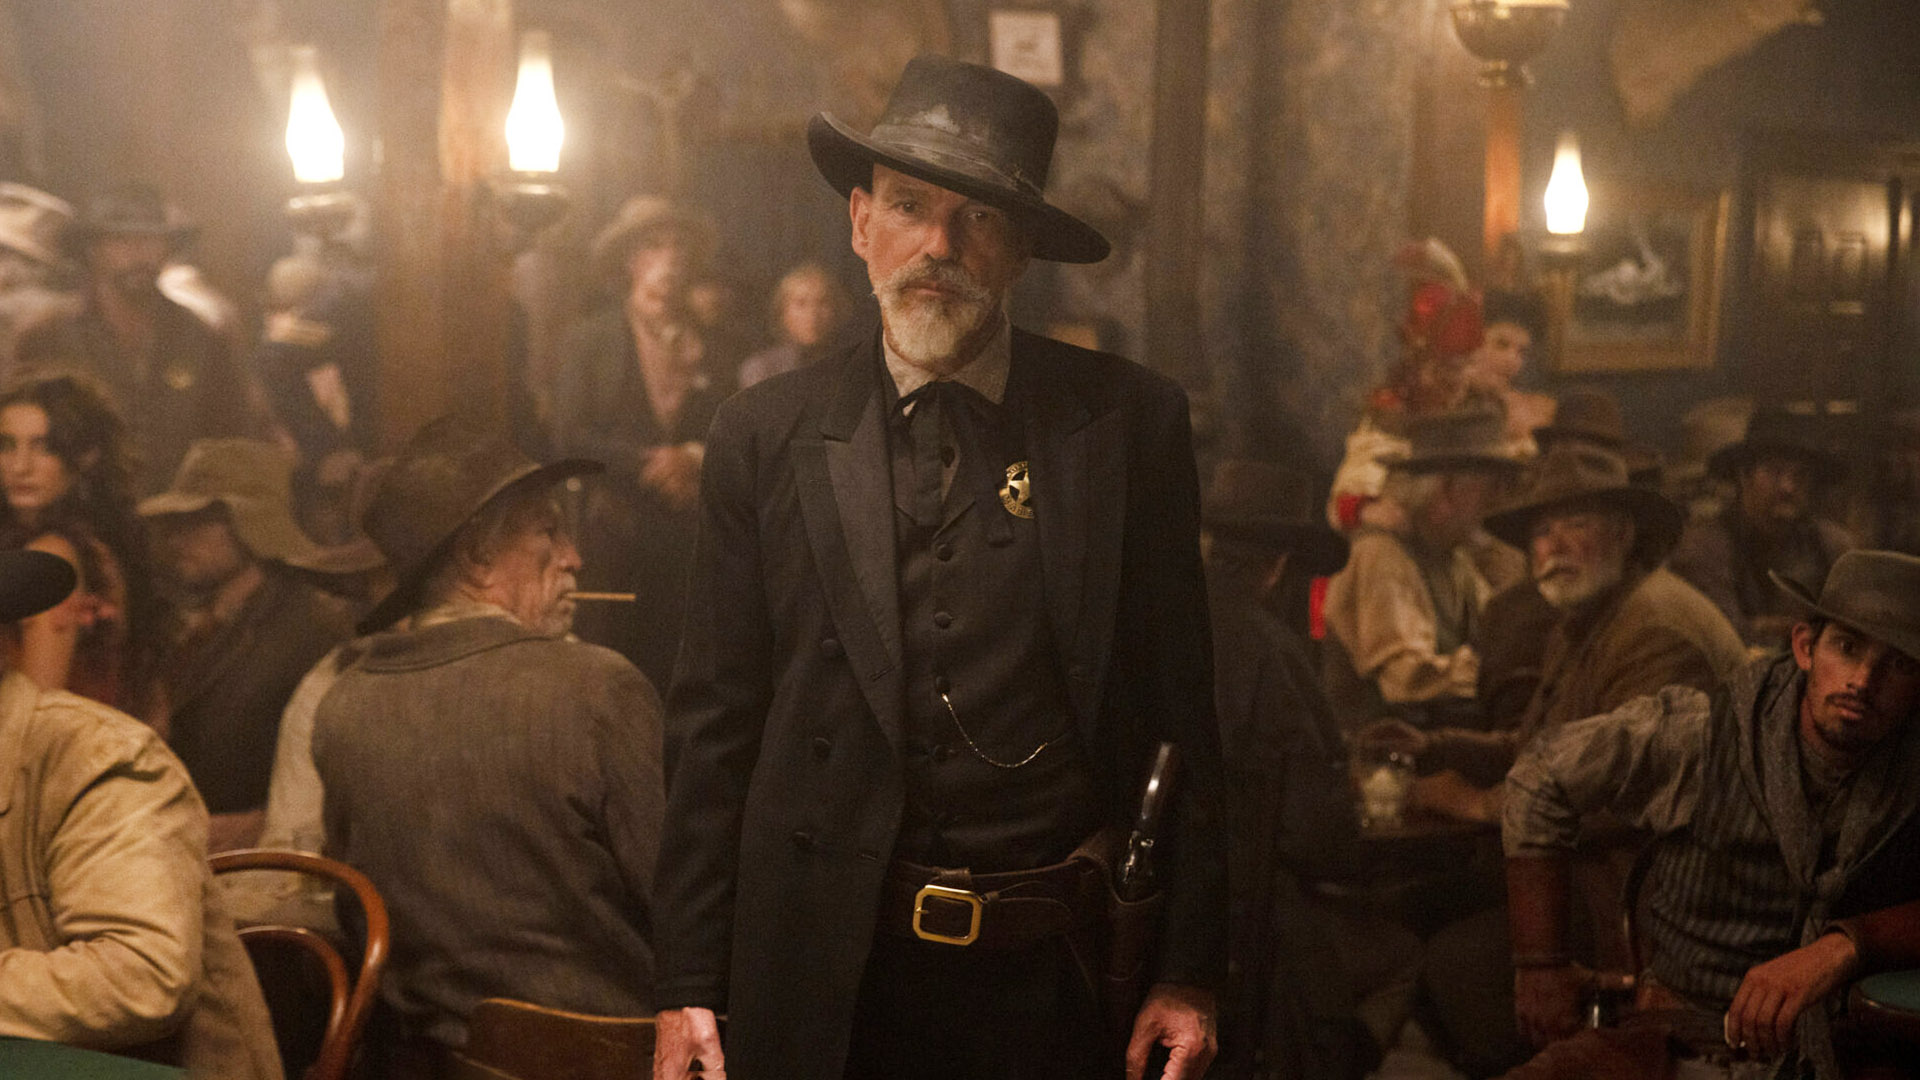 A Controversial (And Very Real) Story Behind Billy Bob Thornton's 1883 Character